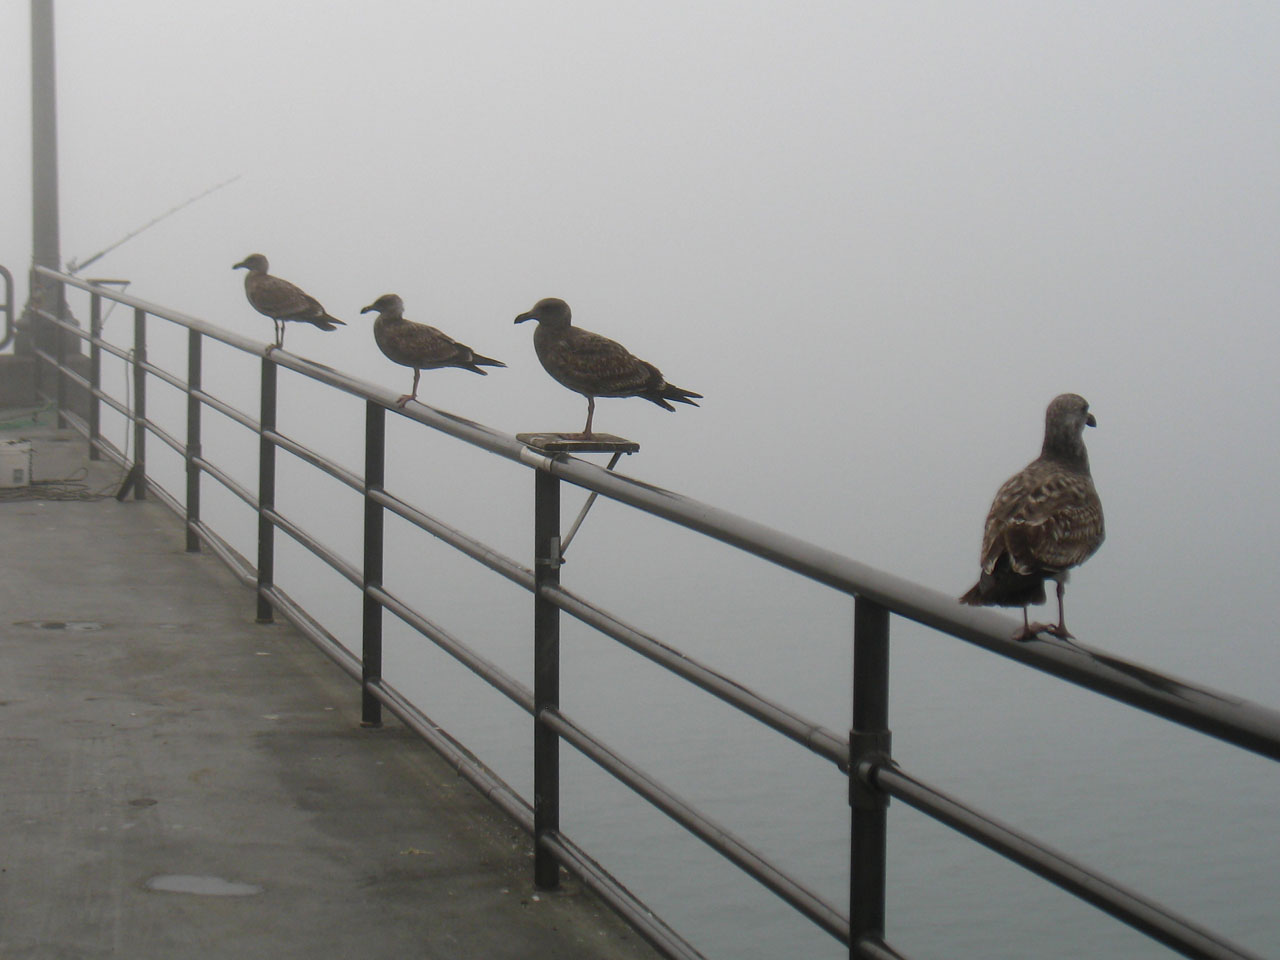 Seagulls Waiting For Fog To Lift